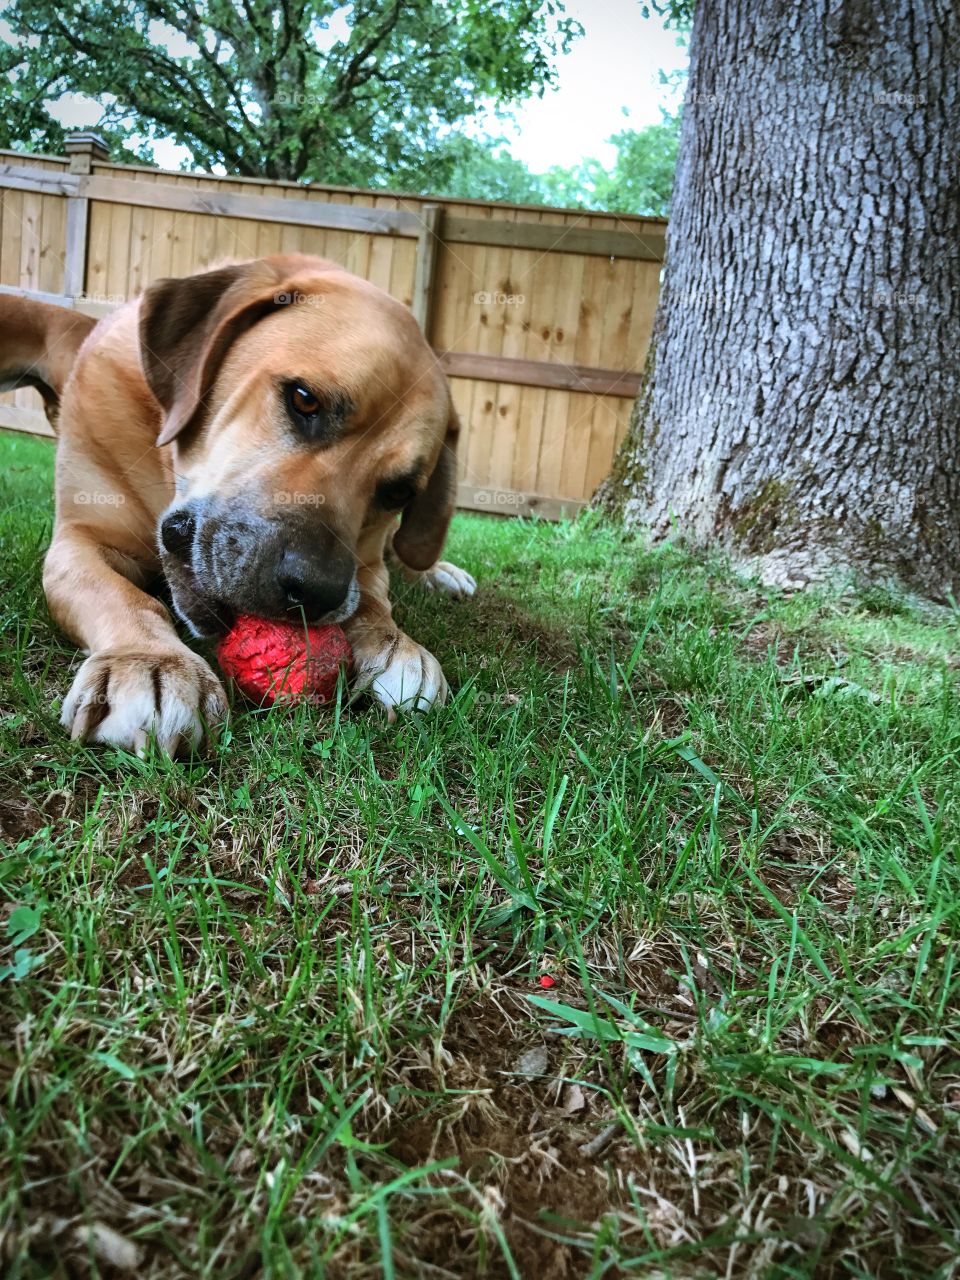 Never too old for a chew toy 